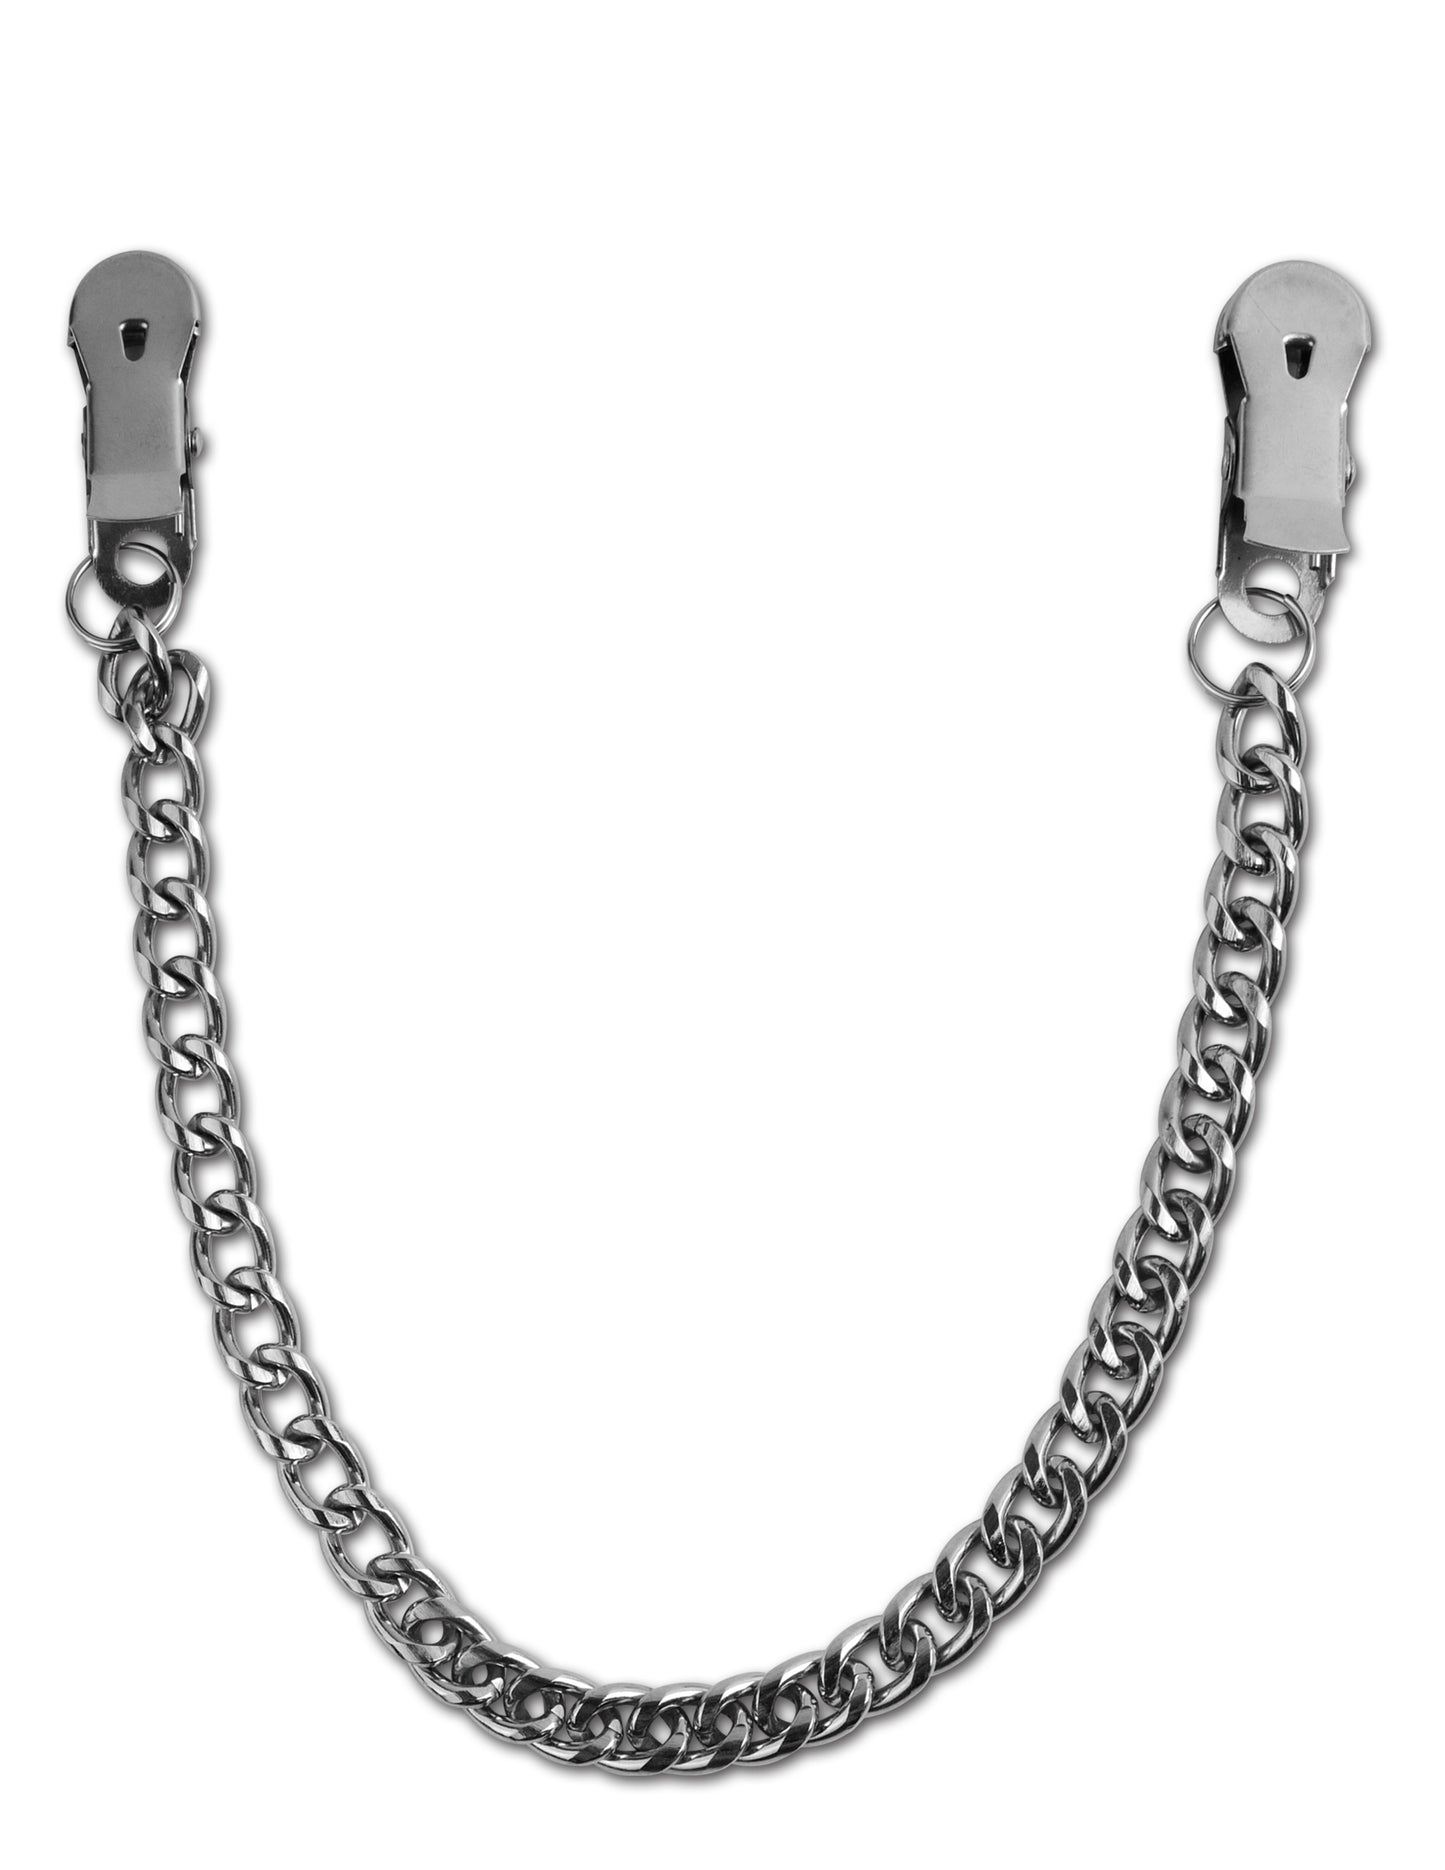 Tit Chain Clamps (Fetish Fantasy Series)